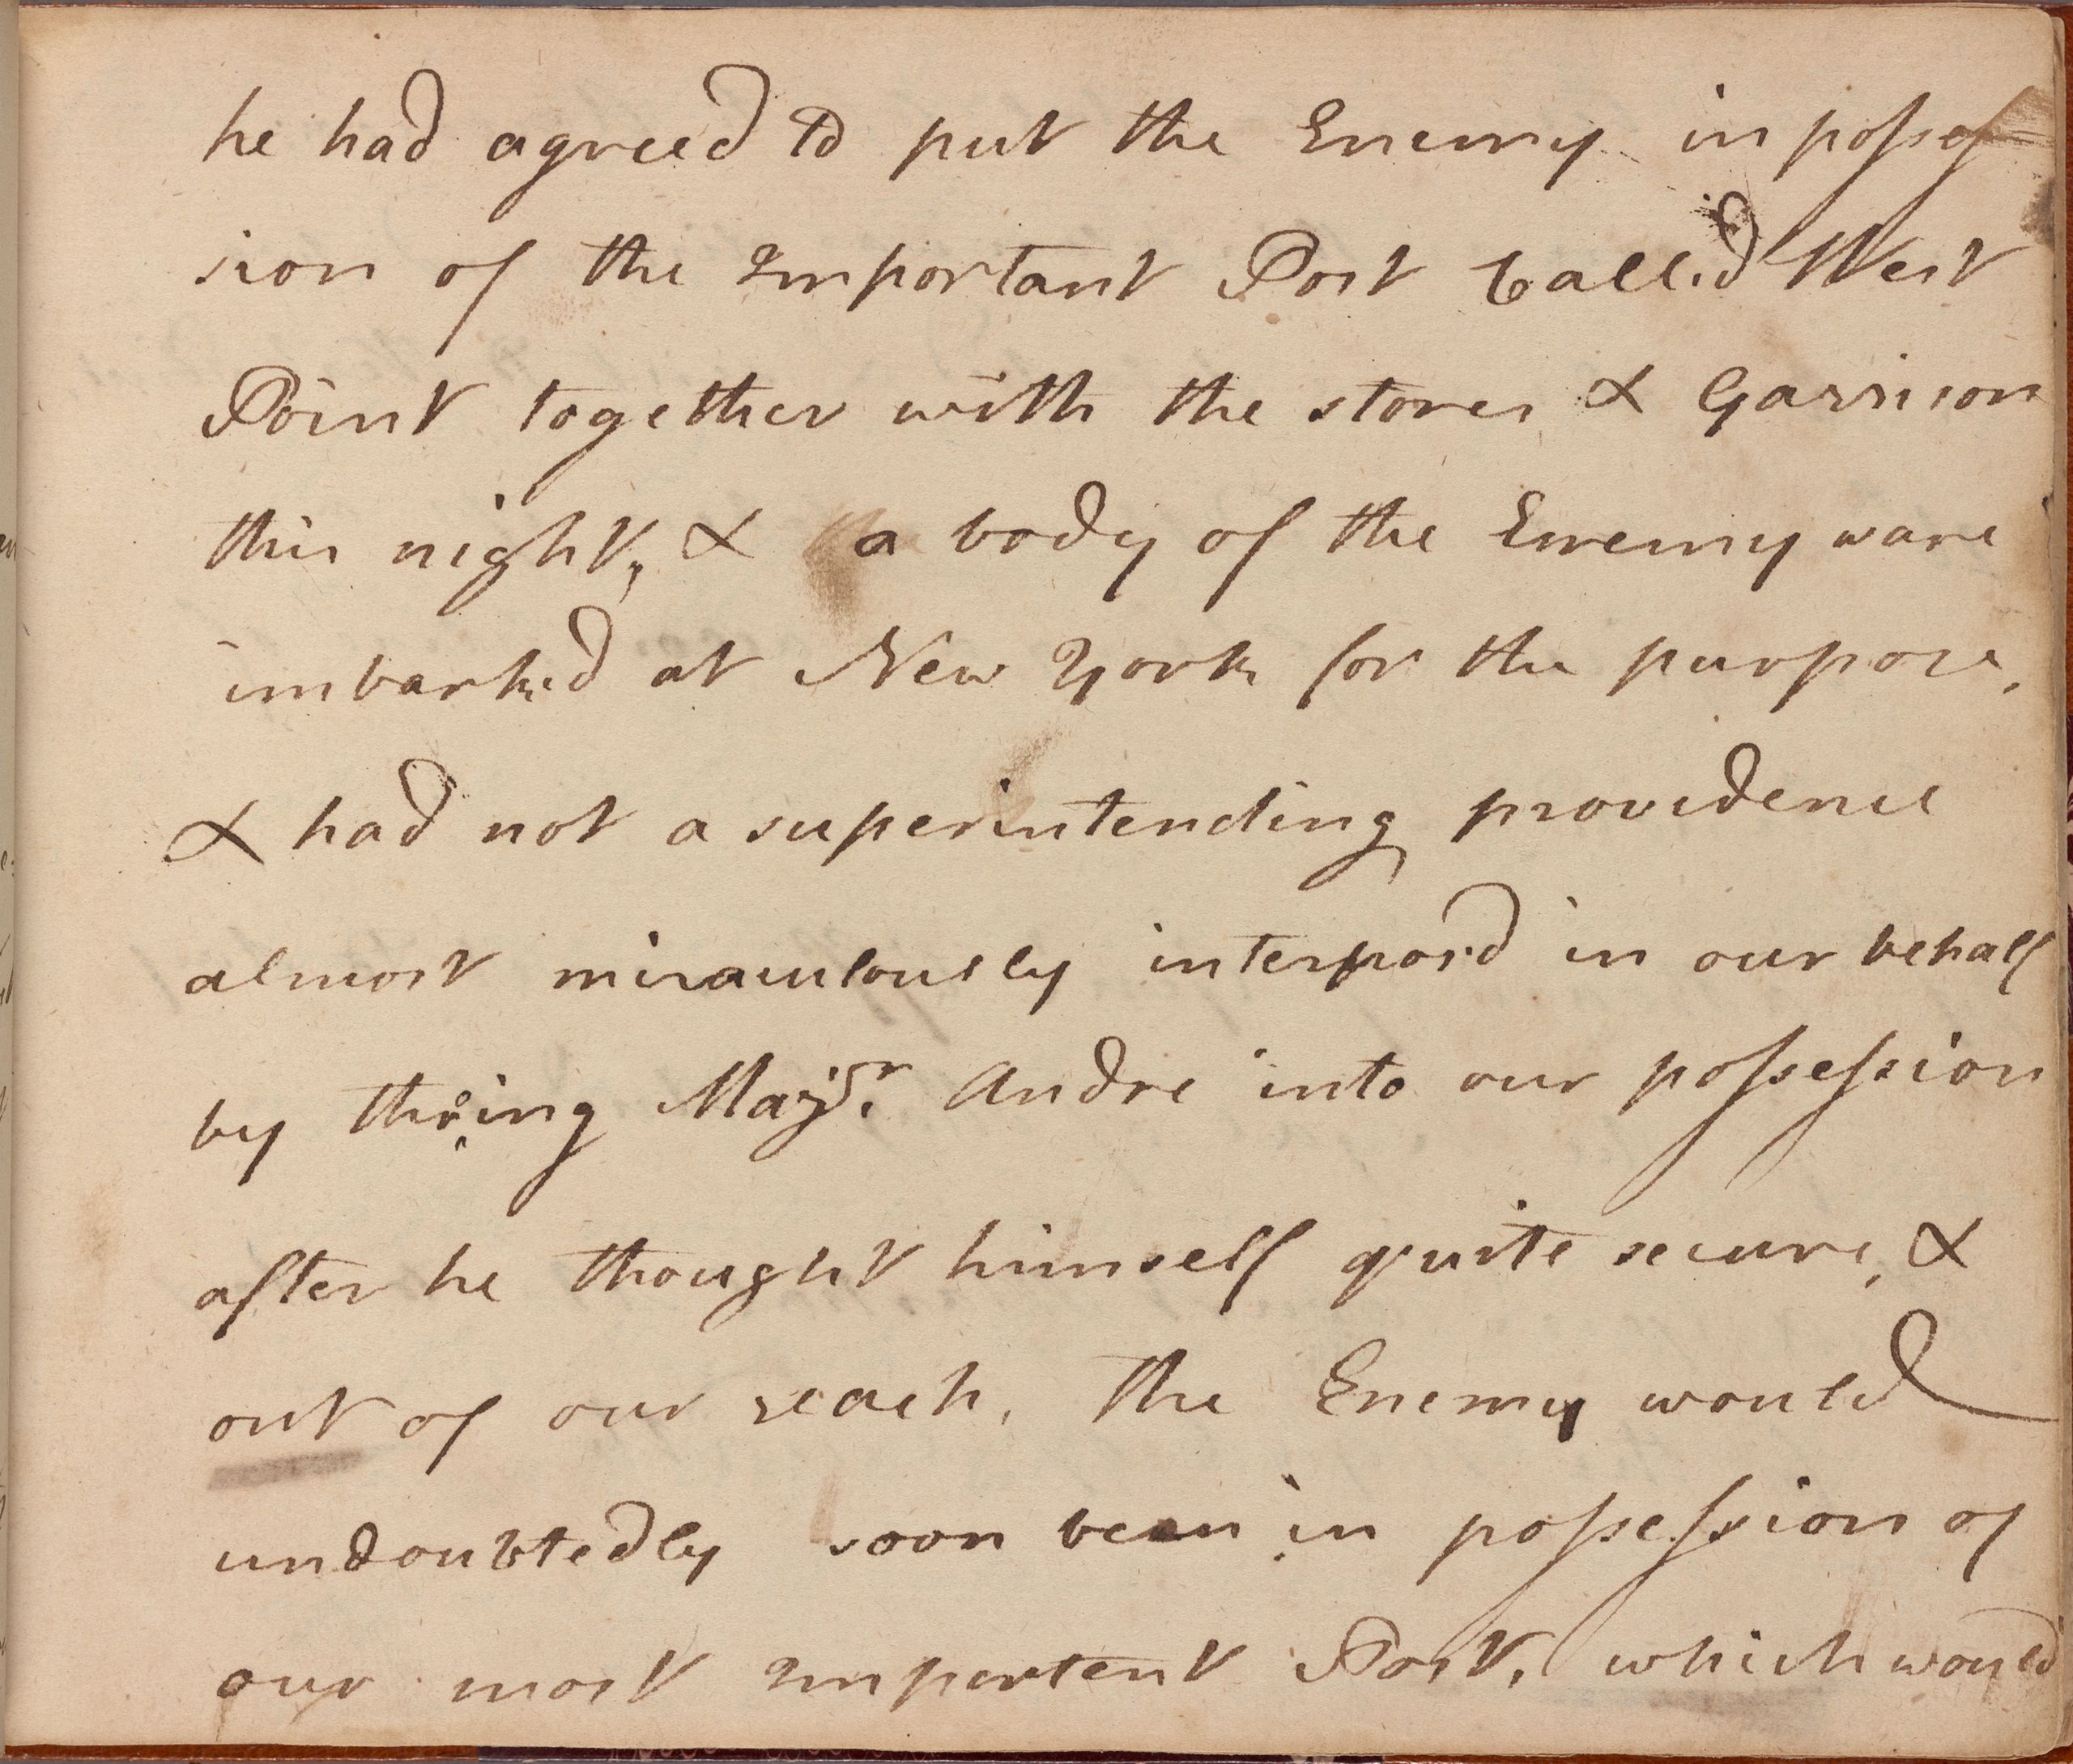 Diary of Col. Dearborn from Oct. 28, 1779 to Dec. 10, 1781